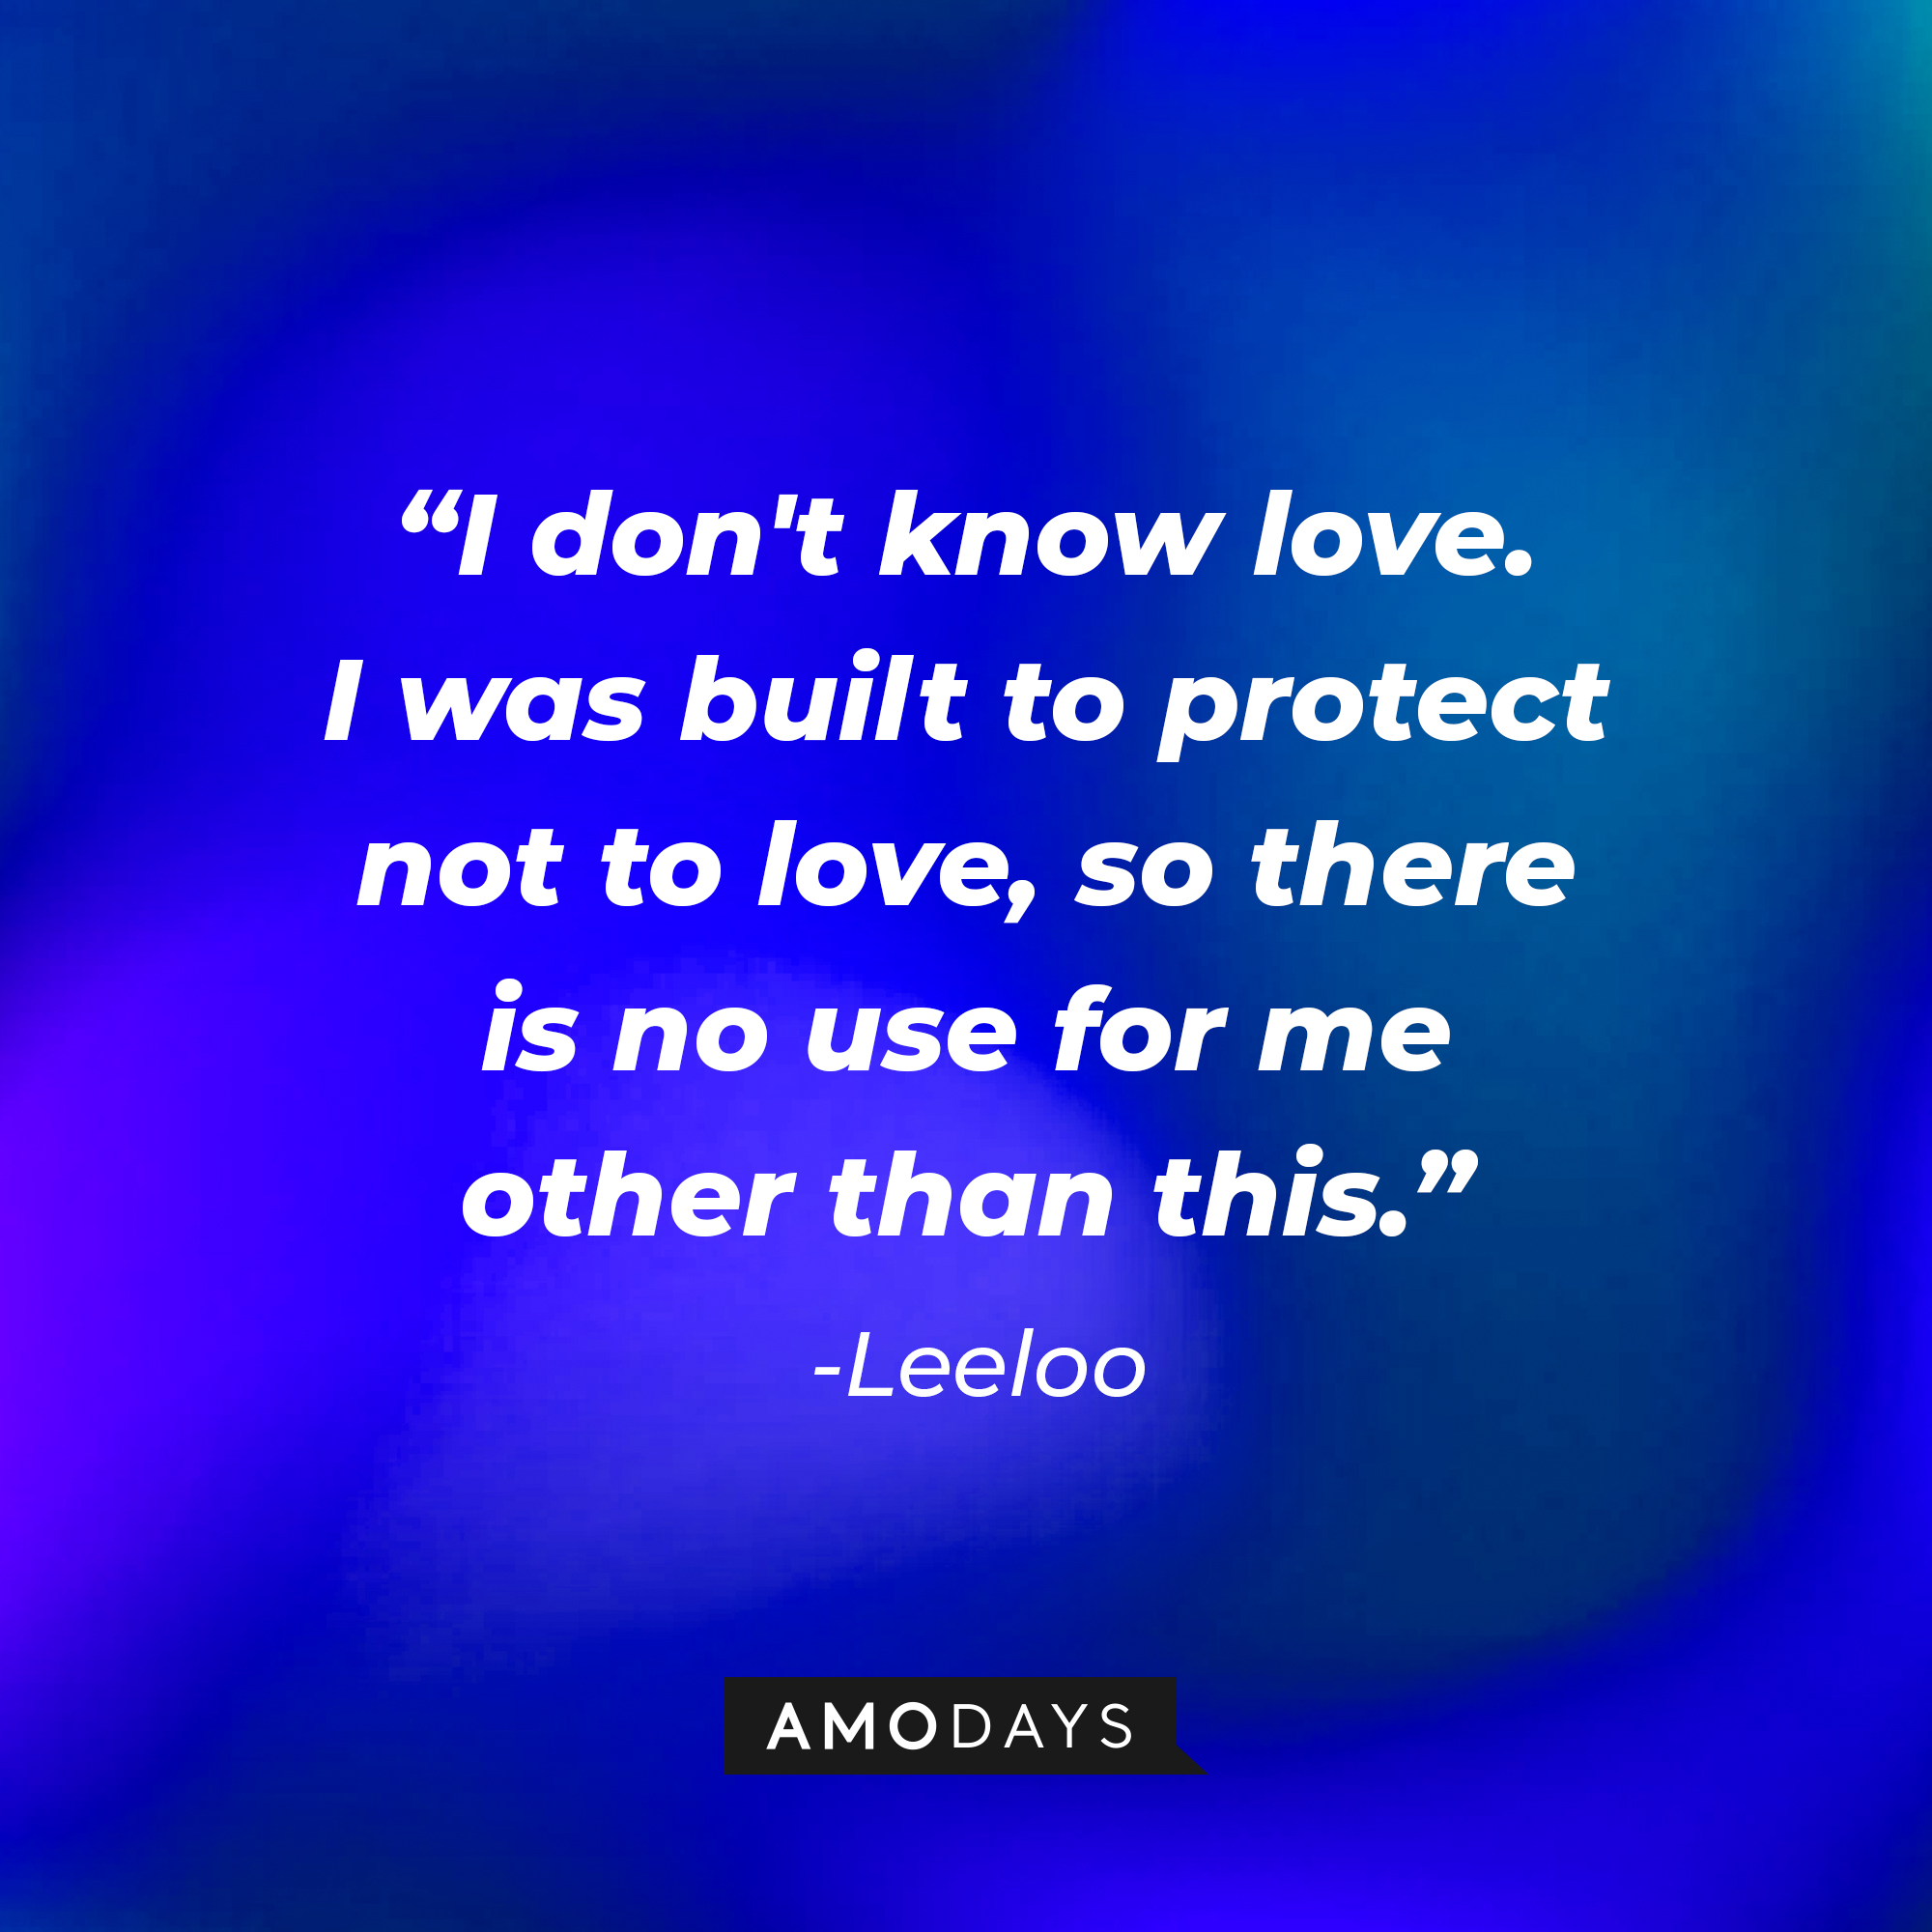 Leeloo's quote: "I don't know love. I was built to protect not to love, so there is no use for me other than this" | Source: Amodays